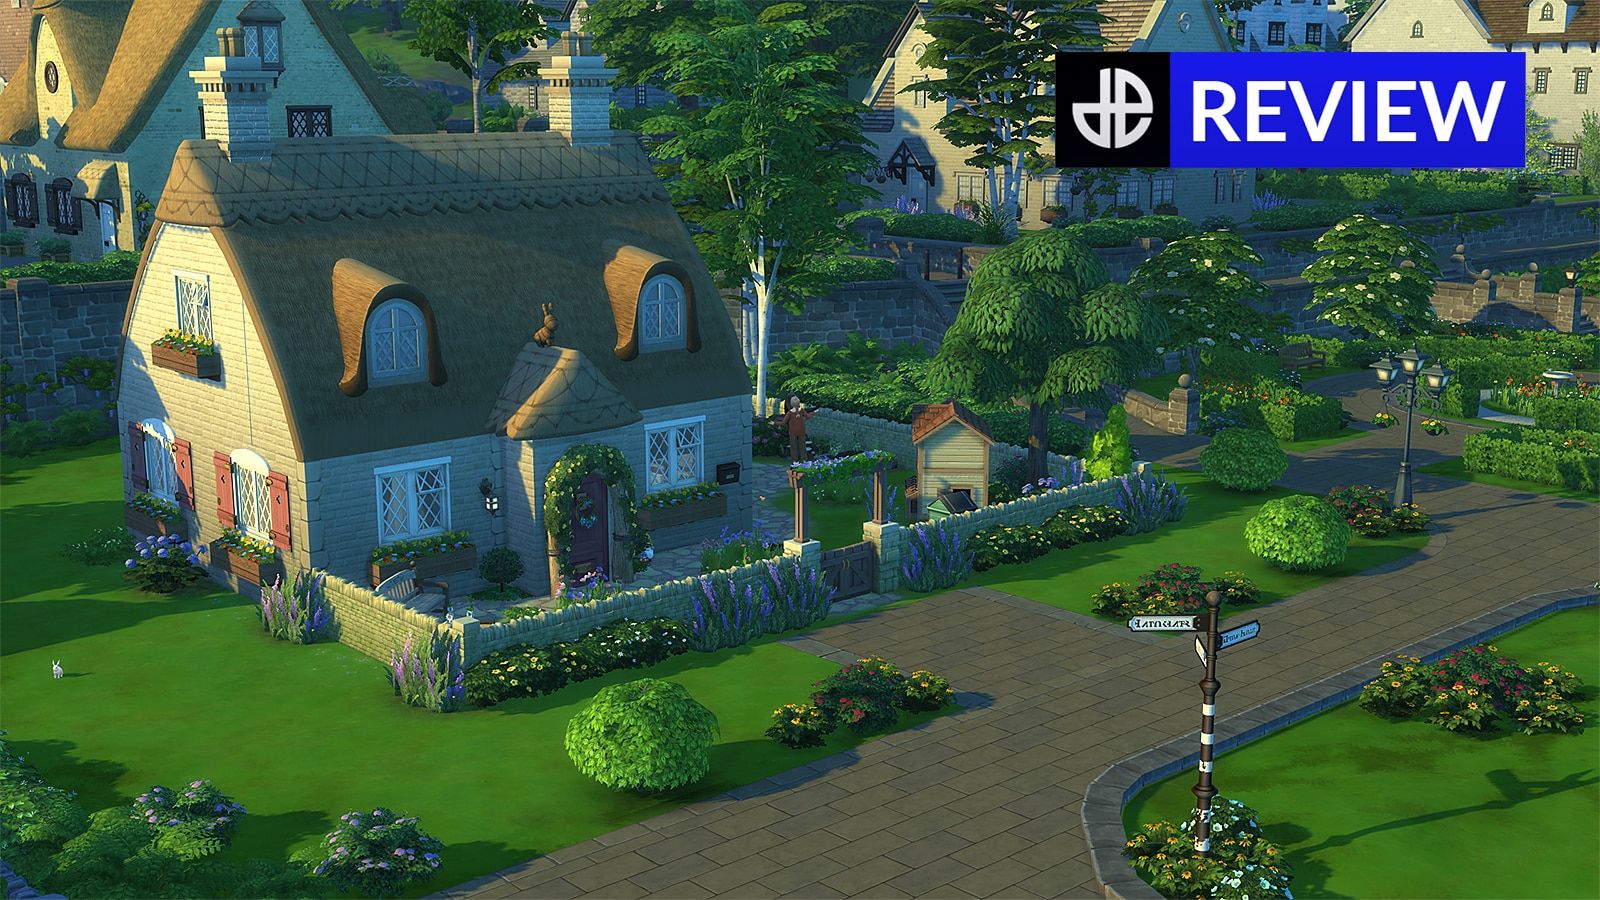 The Sims 4: Cottage Living Expansion Pack - Xbox One/series X